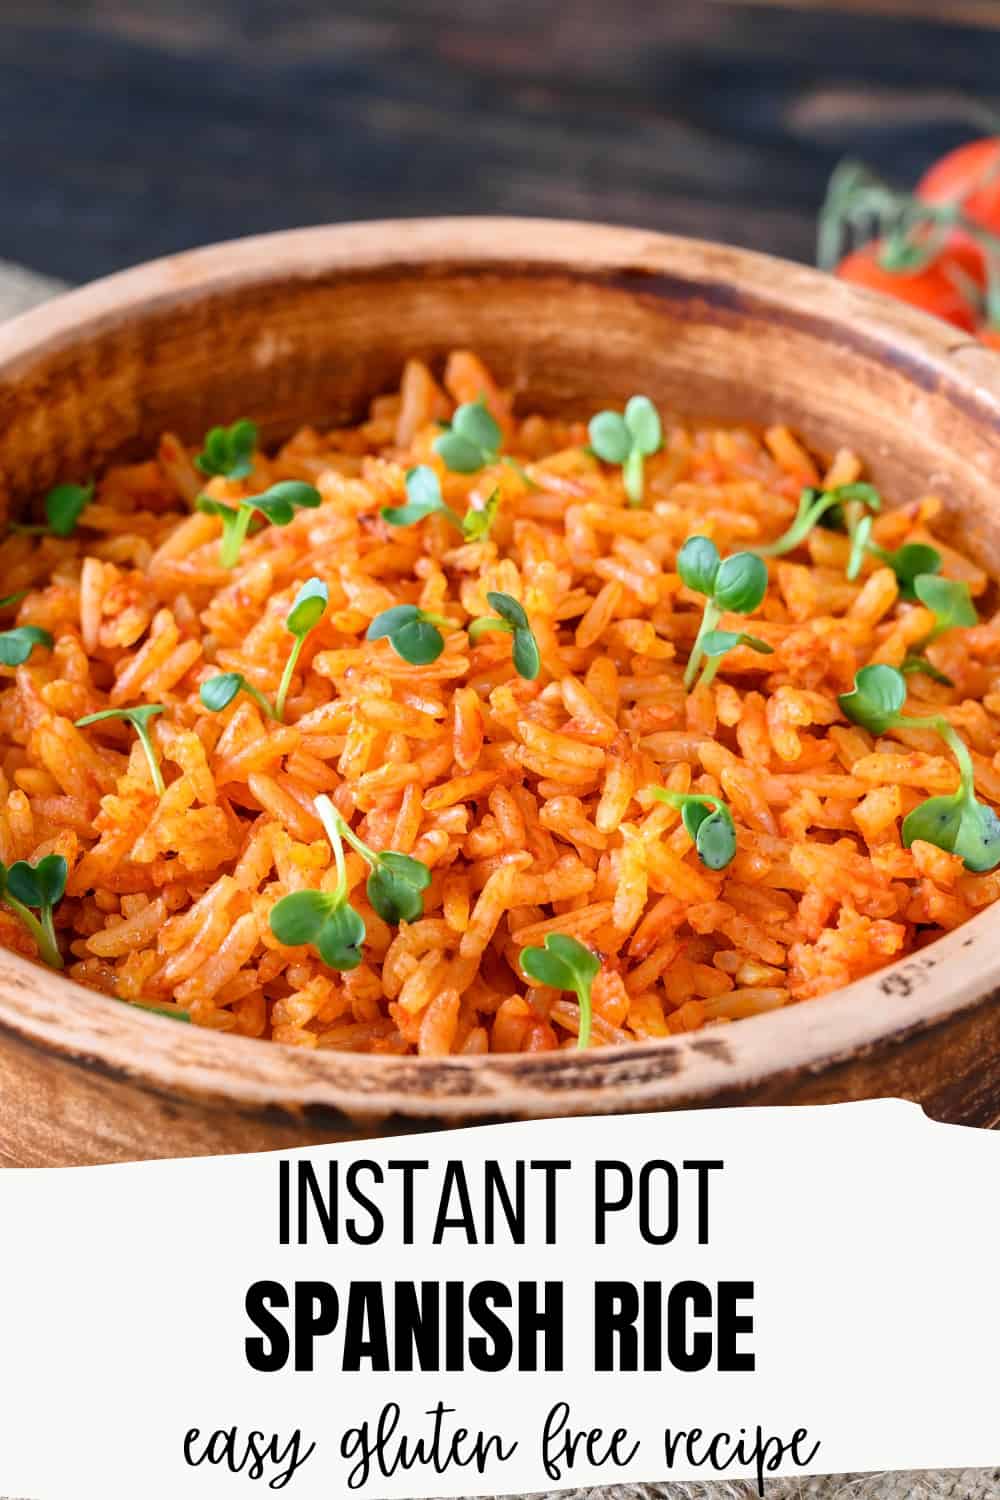 pressure cooked spanish rice with vegetables and tomatoes in a brown bowl